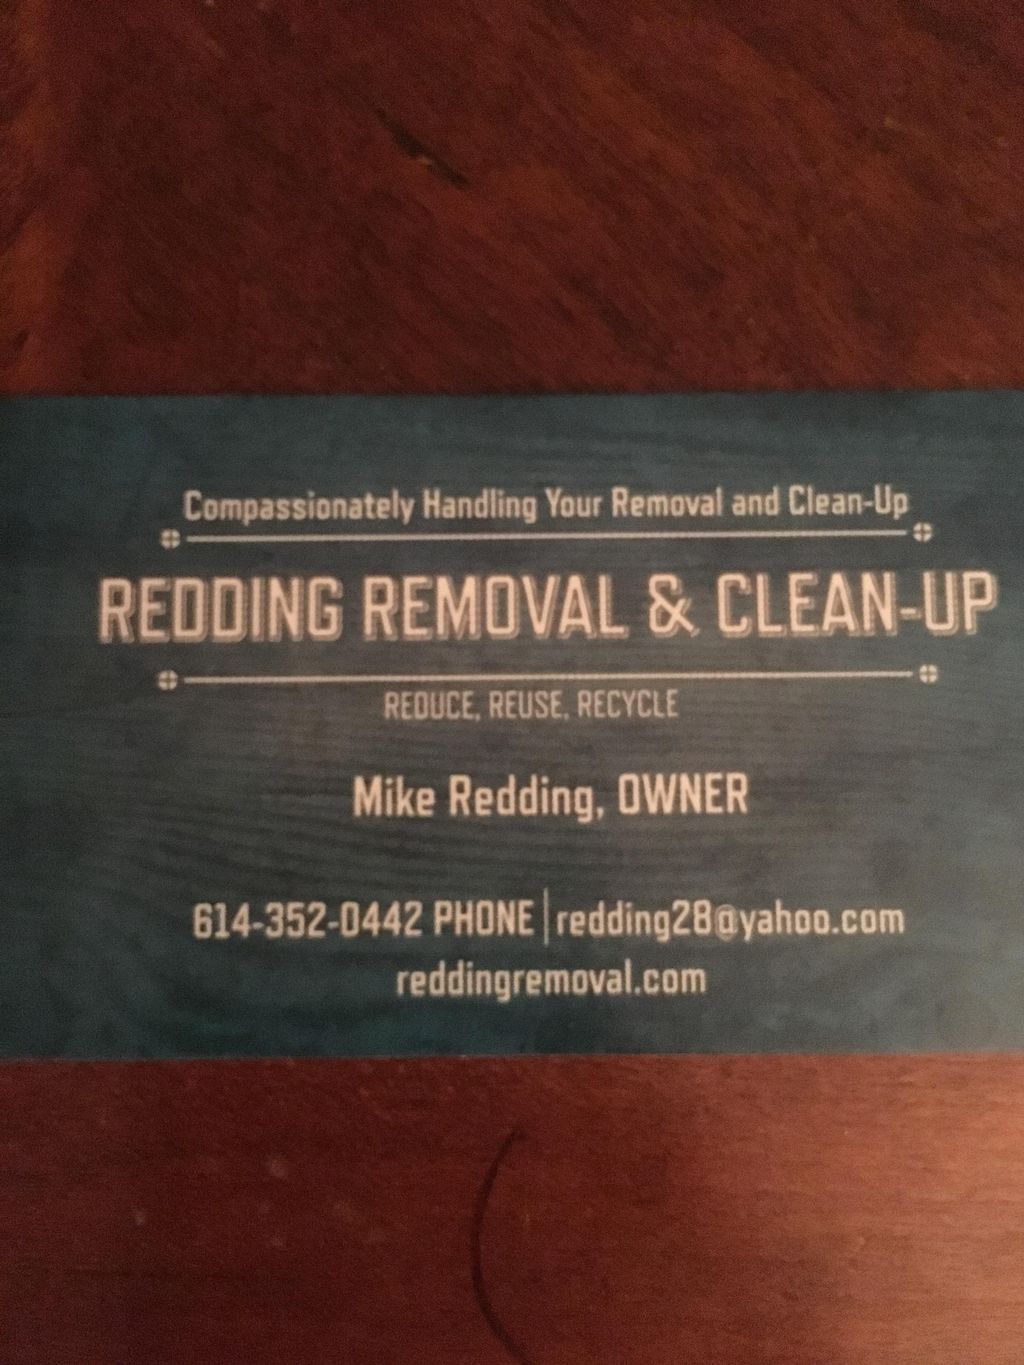 Redding Removal & Clean-up